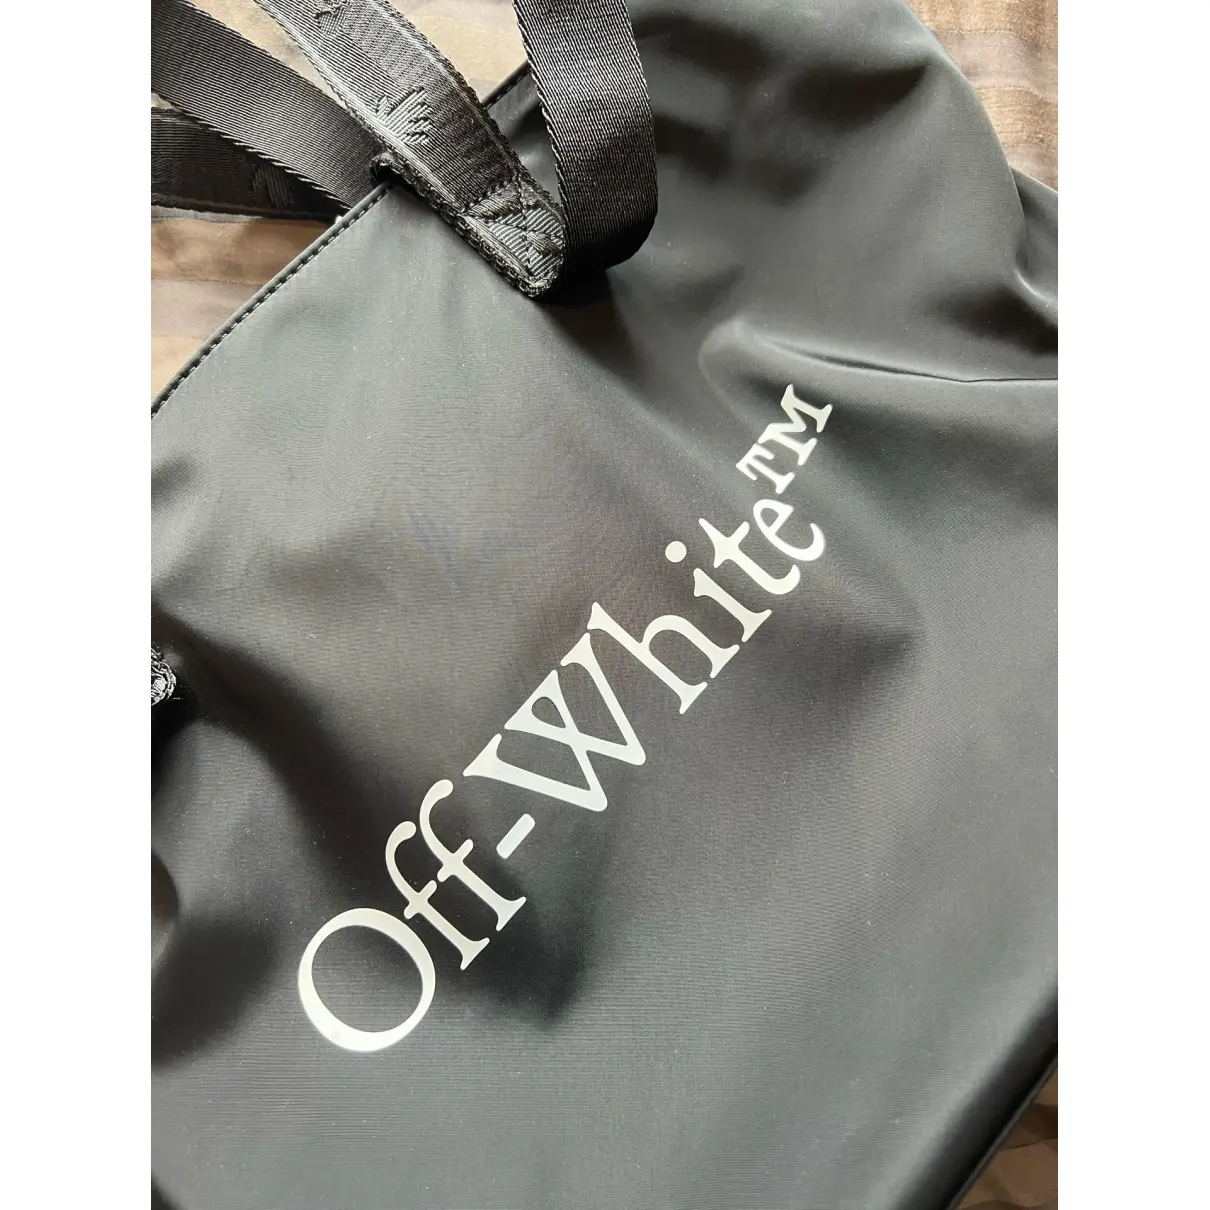 Buy Off-White Tote online